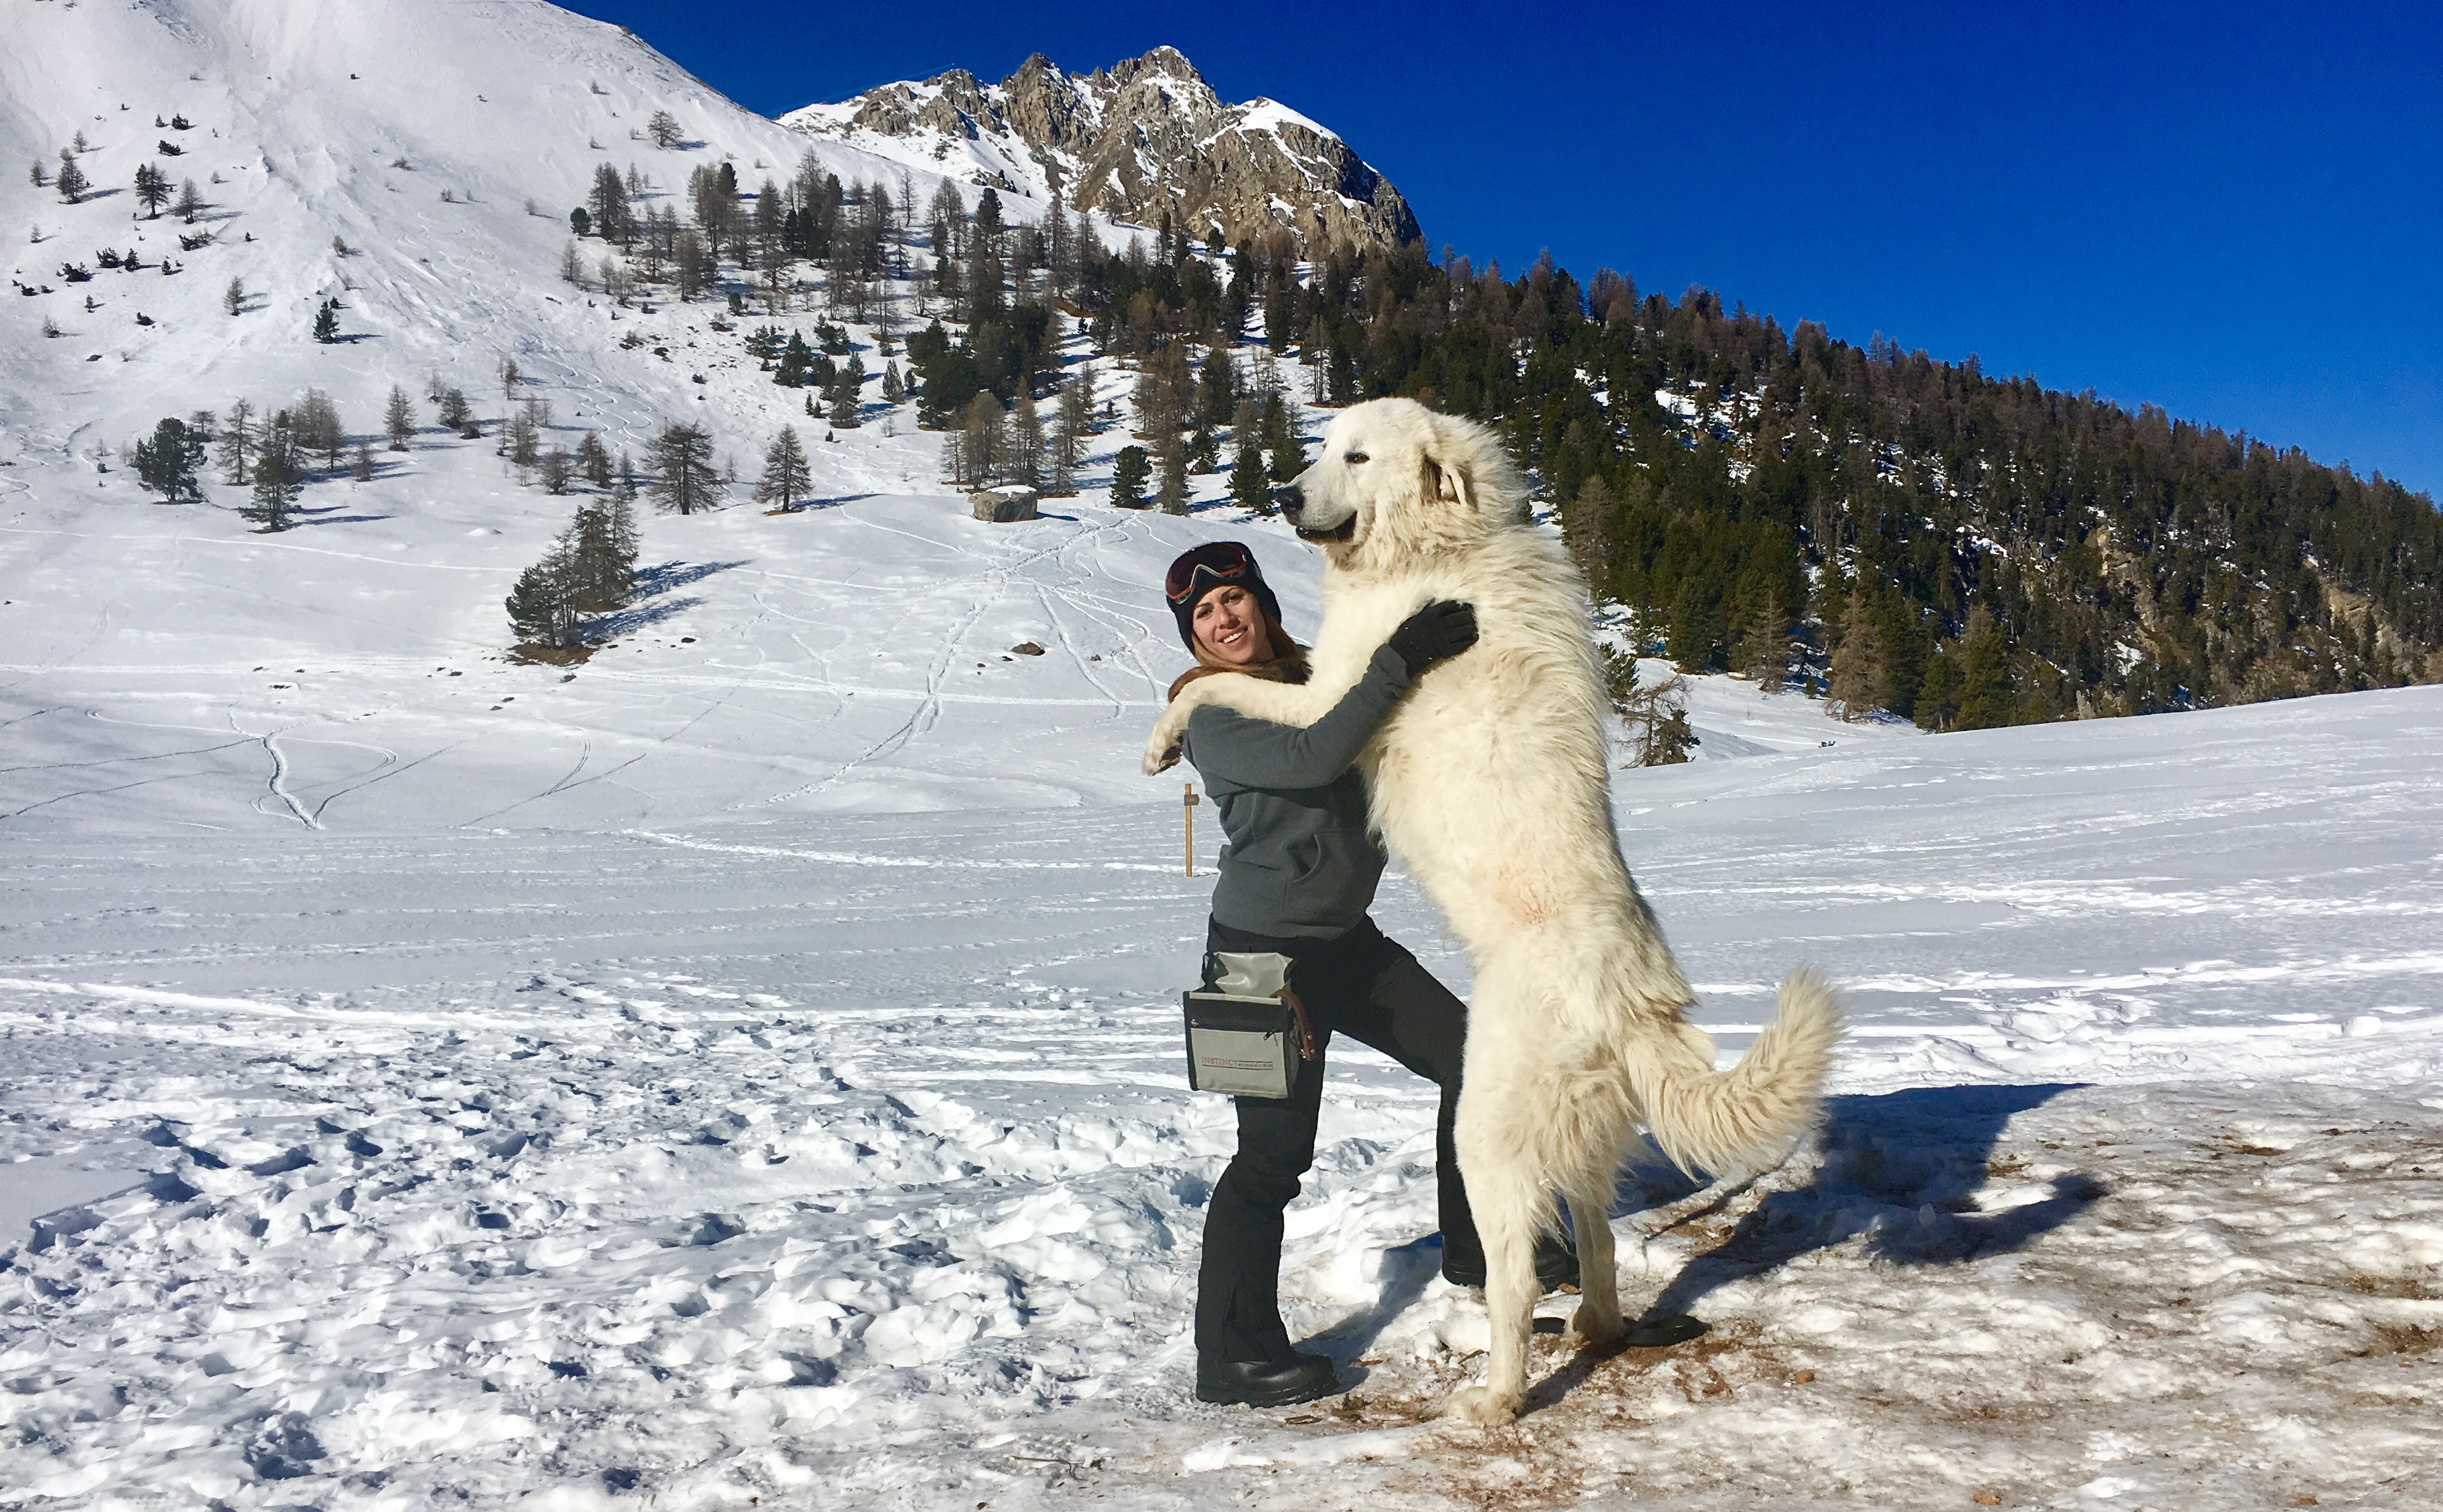 Behind the scenes at Belle and Sebastian final movie featuring Instinct Animals for Film’s Pyrenean Mountain Dog